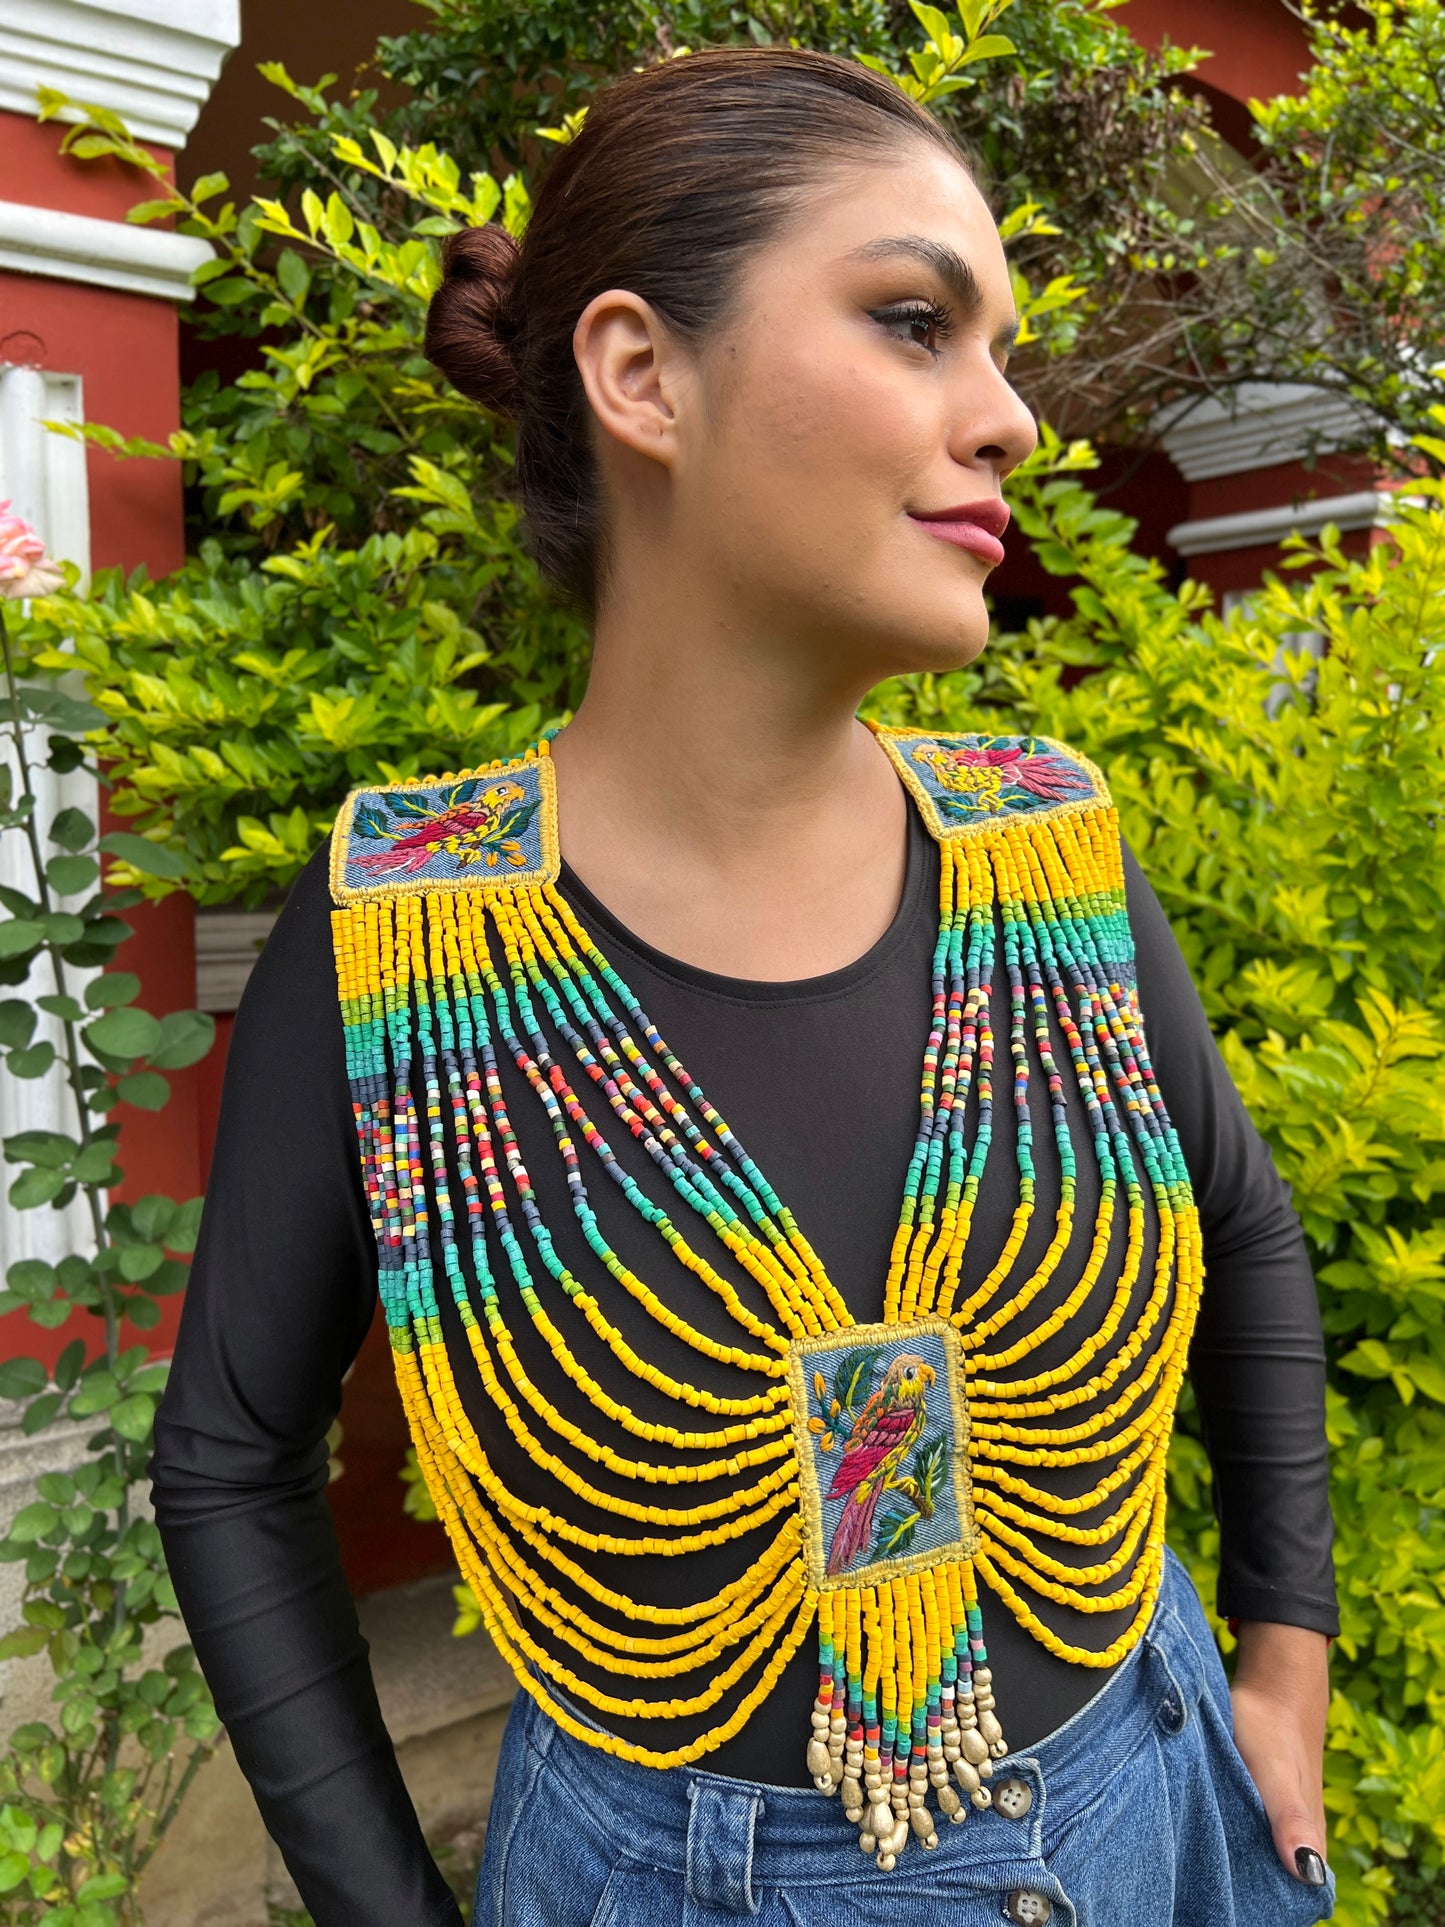 Body Jewelry with Beaded Chains - "Warrior", Vibrant Birds